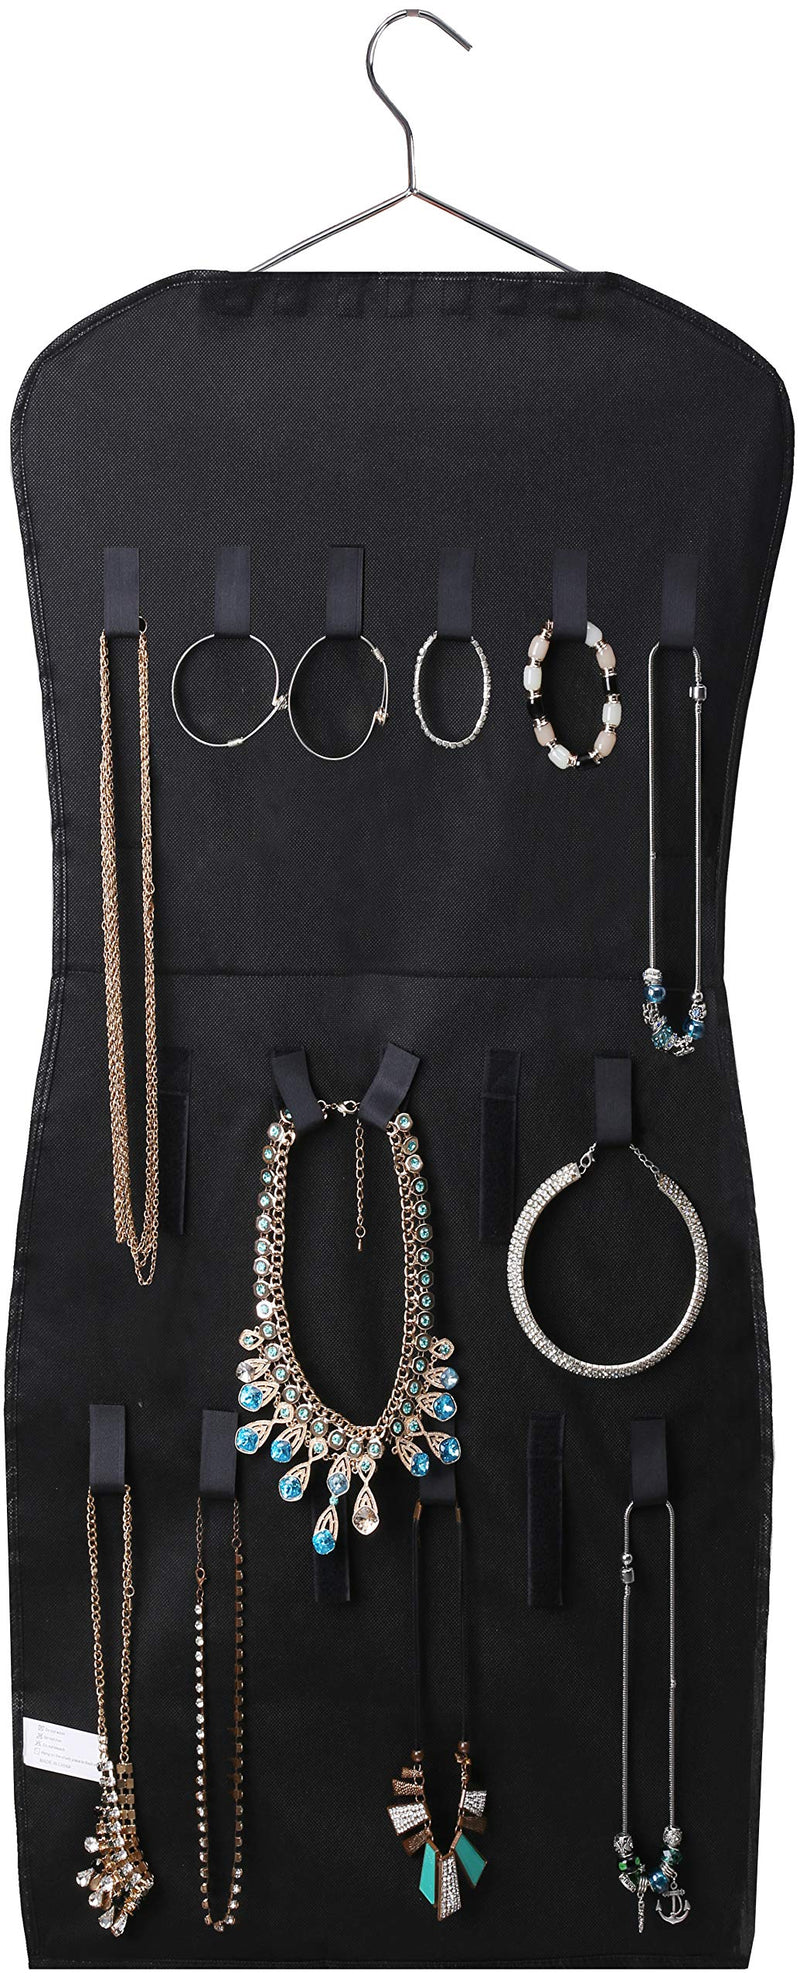 [Australia] - MISSLO Dual sided Hanging Jewelry Organizer with 40 Pockets and 24 Hook & Loops Closet Necklace Holder for Earring Bracelet Ring Chain with Hanger, Black 